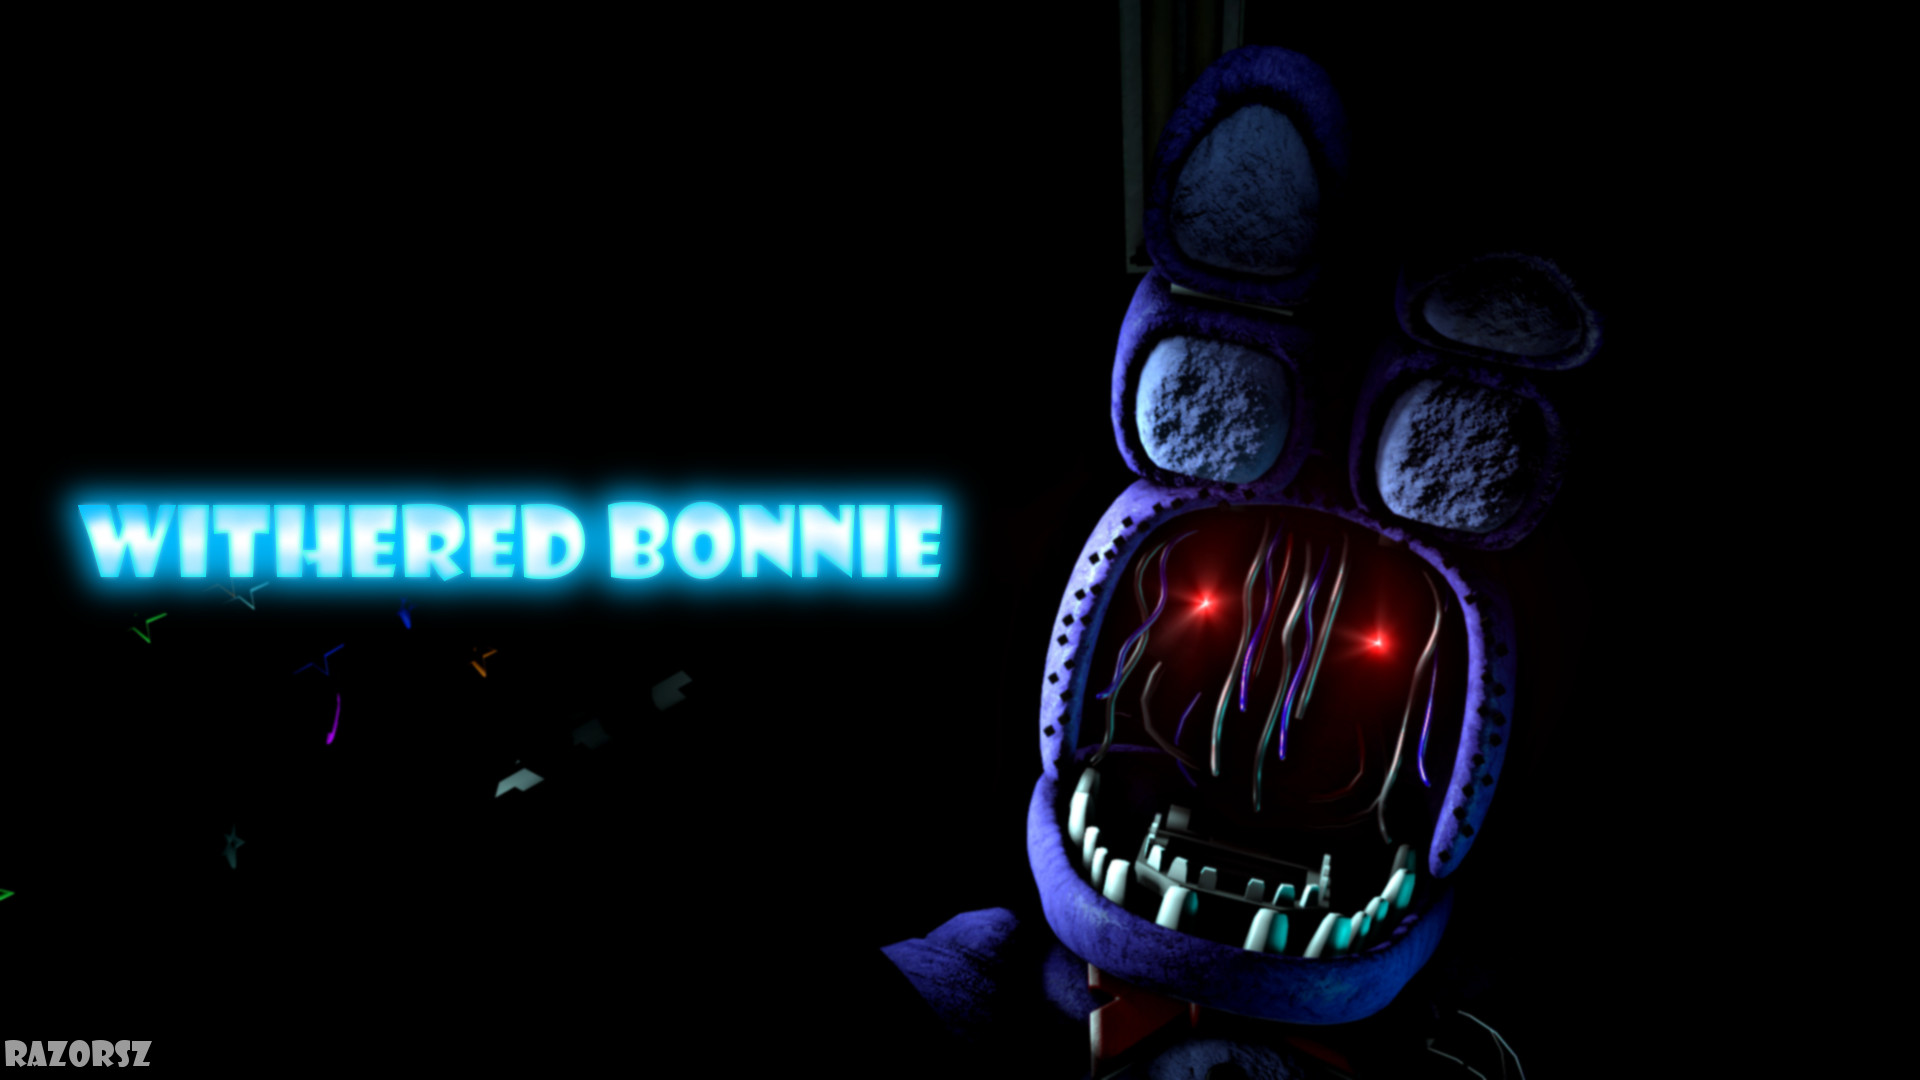 1920x1080 ... Withered Bonnie (Wallpaper) by Razorsz